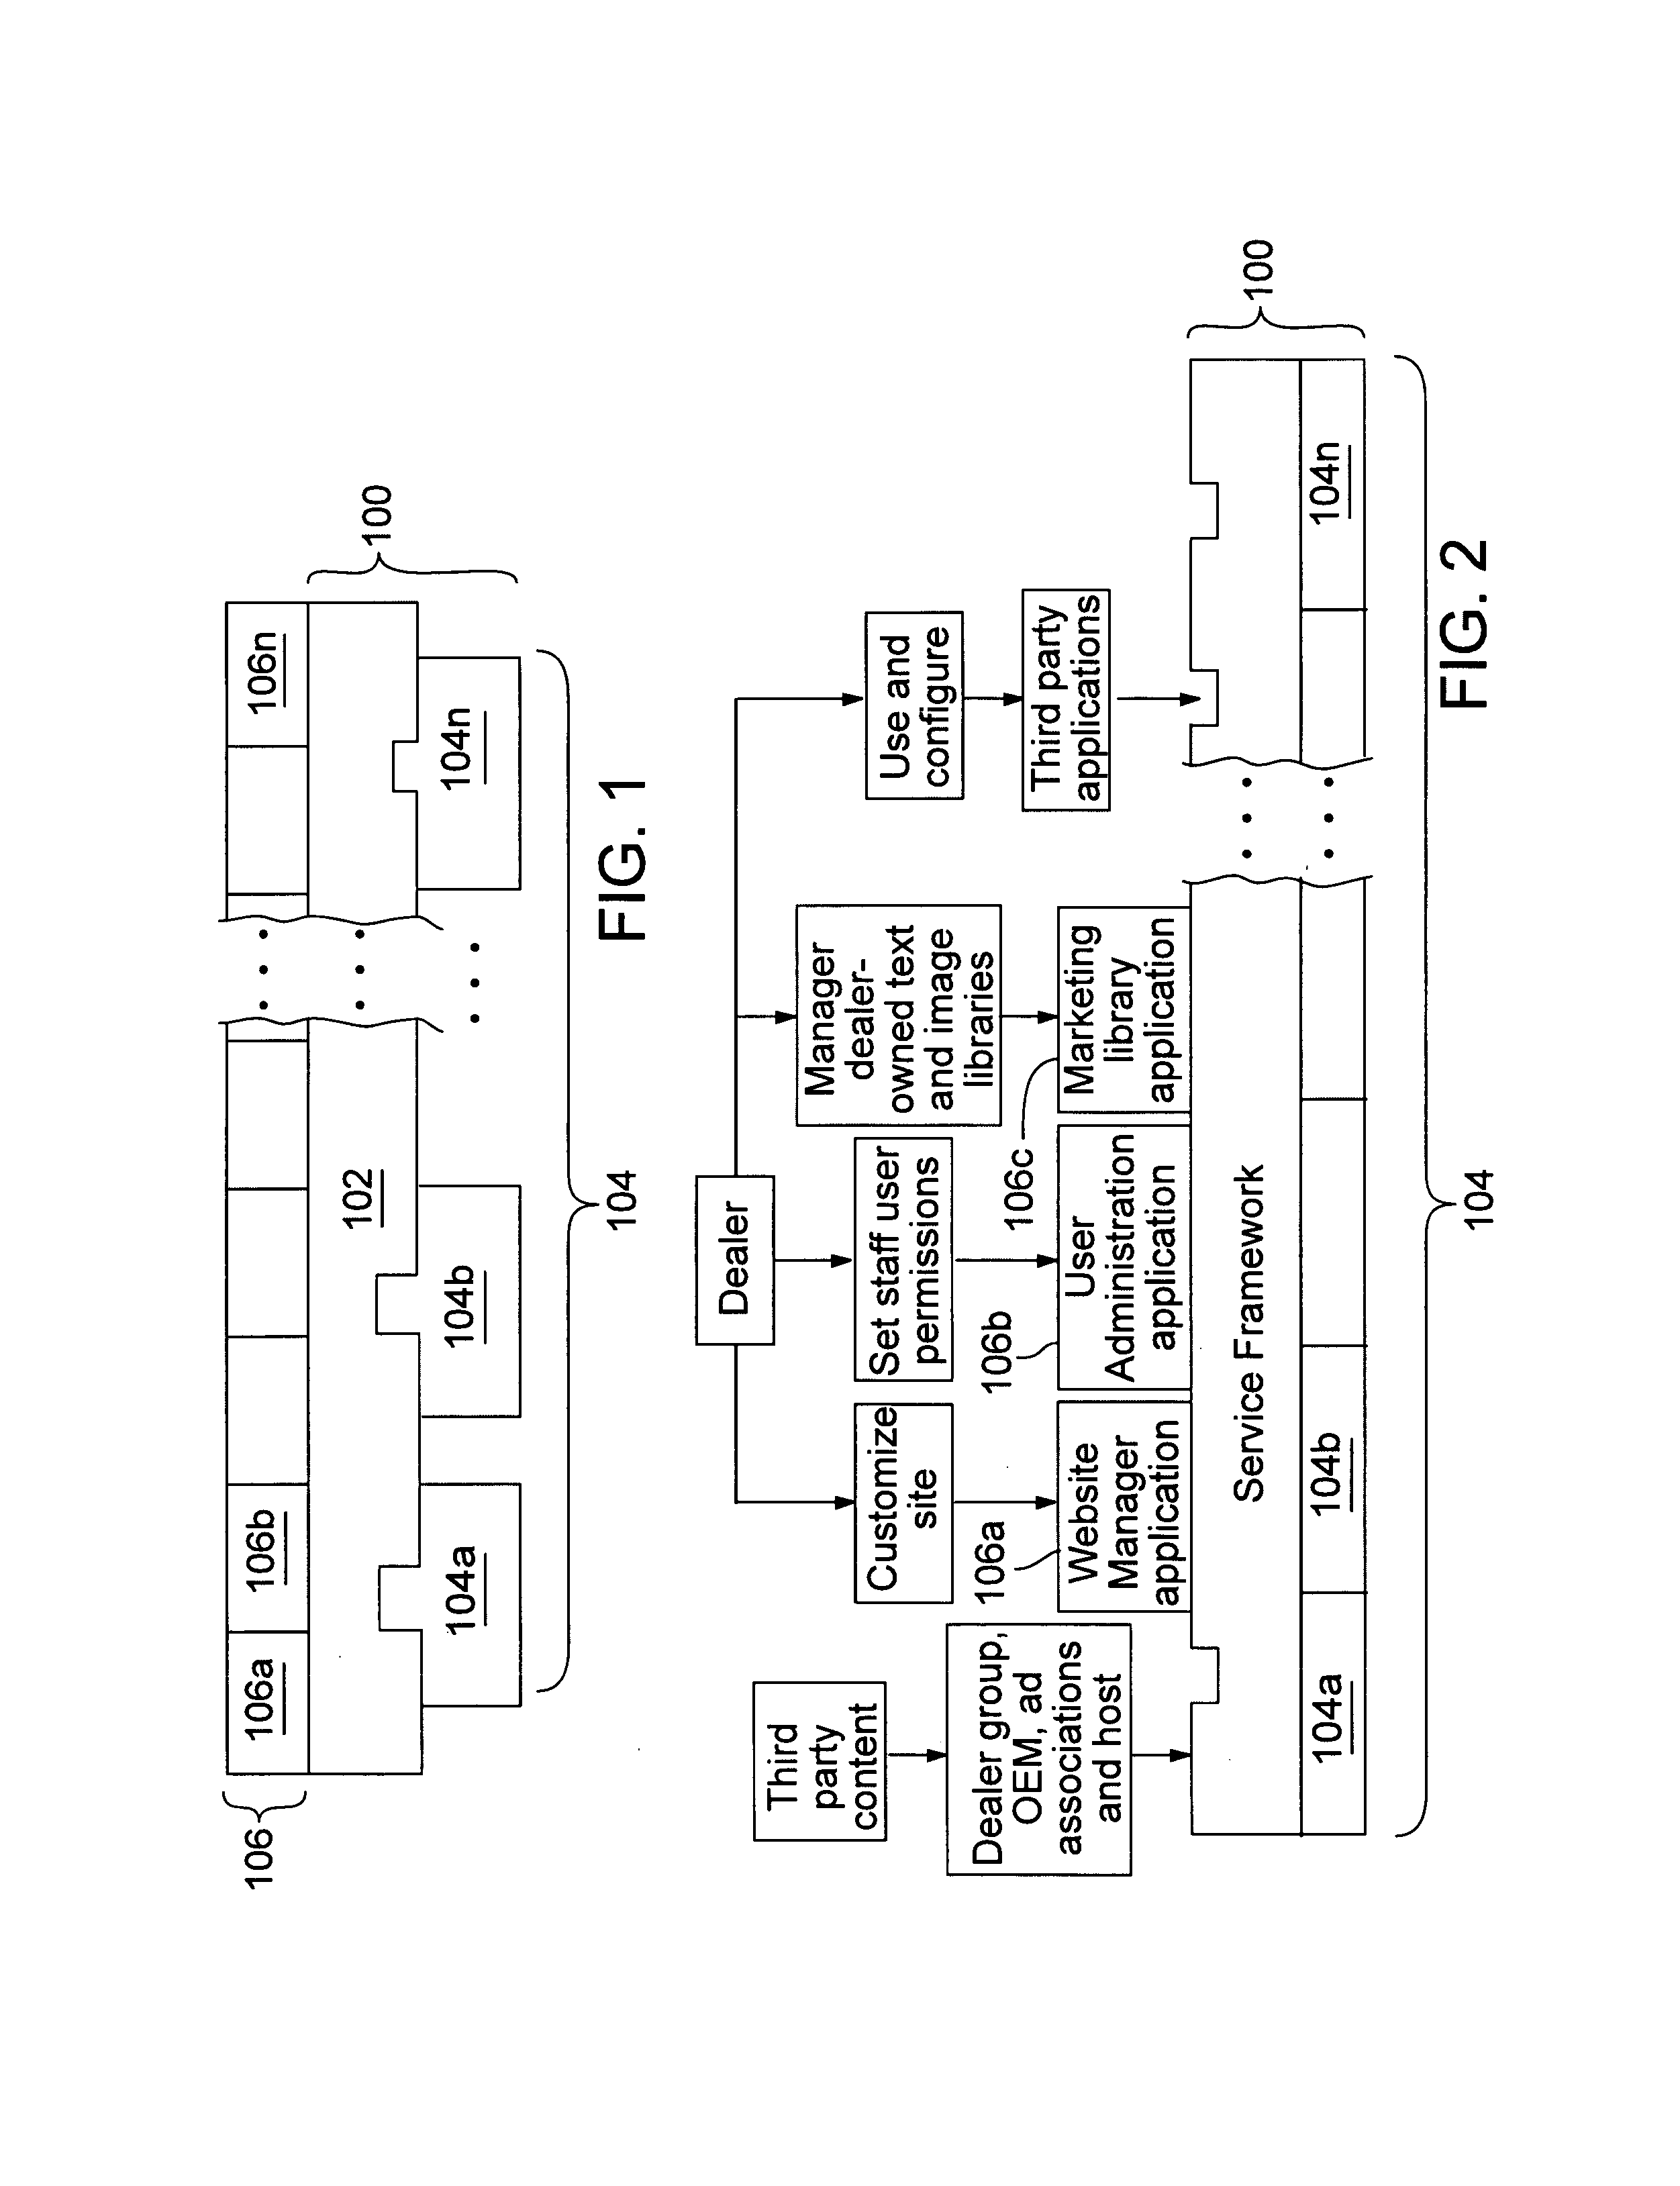 Business platform with networked, association-based business entity access management and active content website configuration